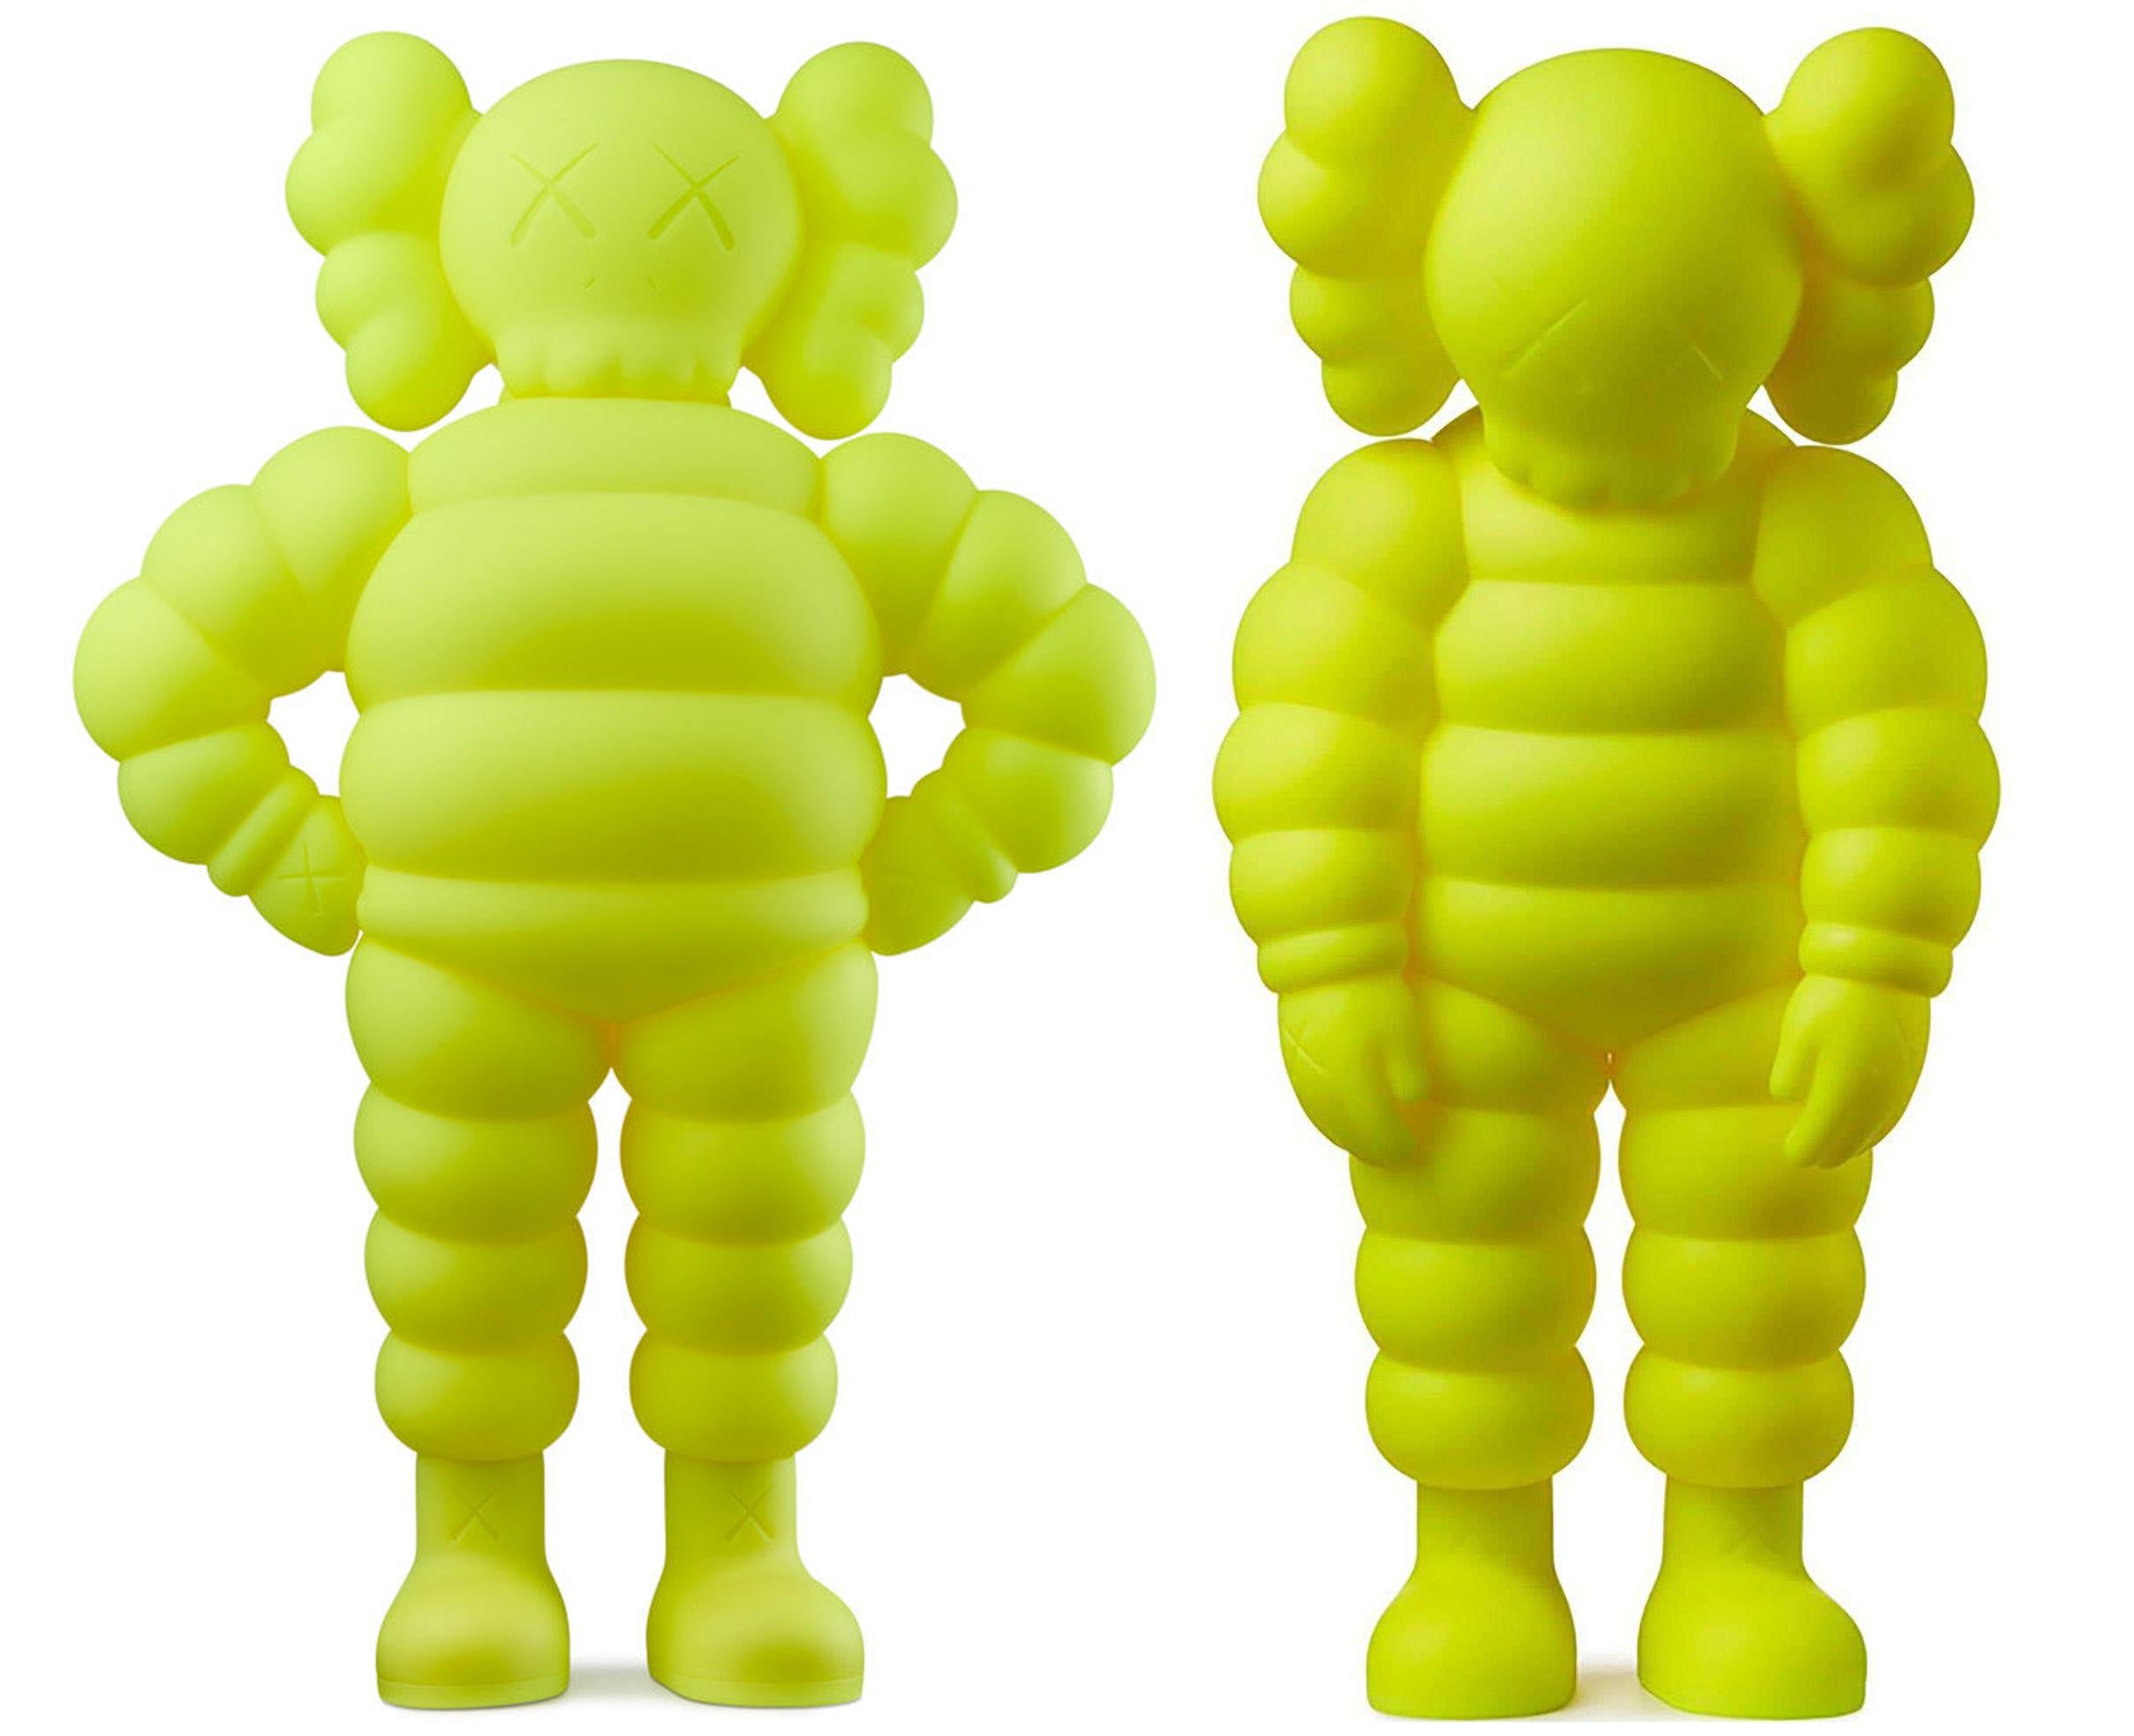 KAWS What Party & Chum (set of 2 works):
Two individual KAWS Companions featuring the classic KAWS CHUM character. Published to commemorate the debut of KAWS’ larger scale sculptural version of same at K11 Musea Hong Kong & the heralded KAWS WHAT